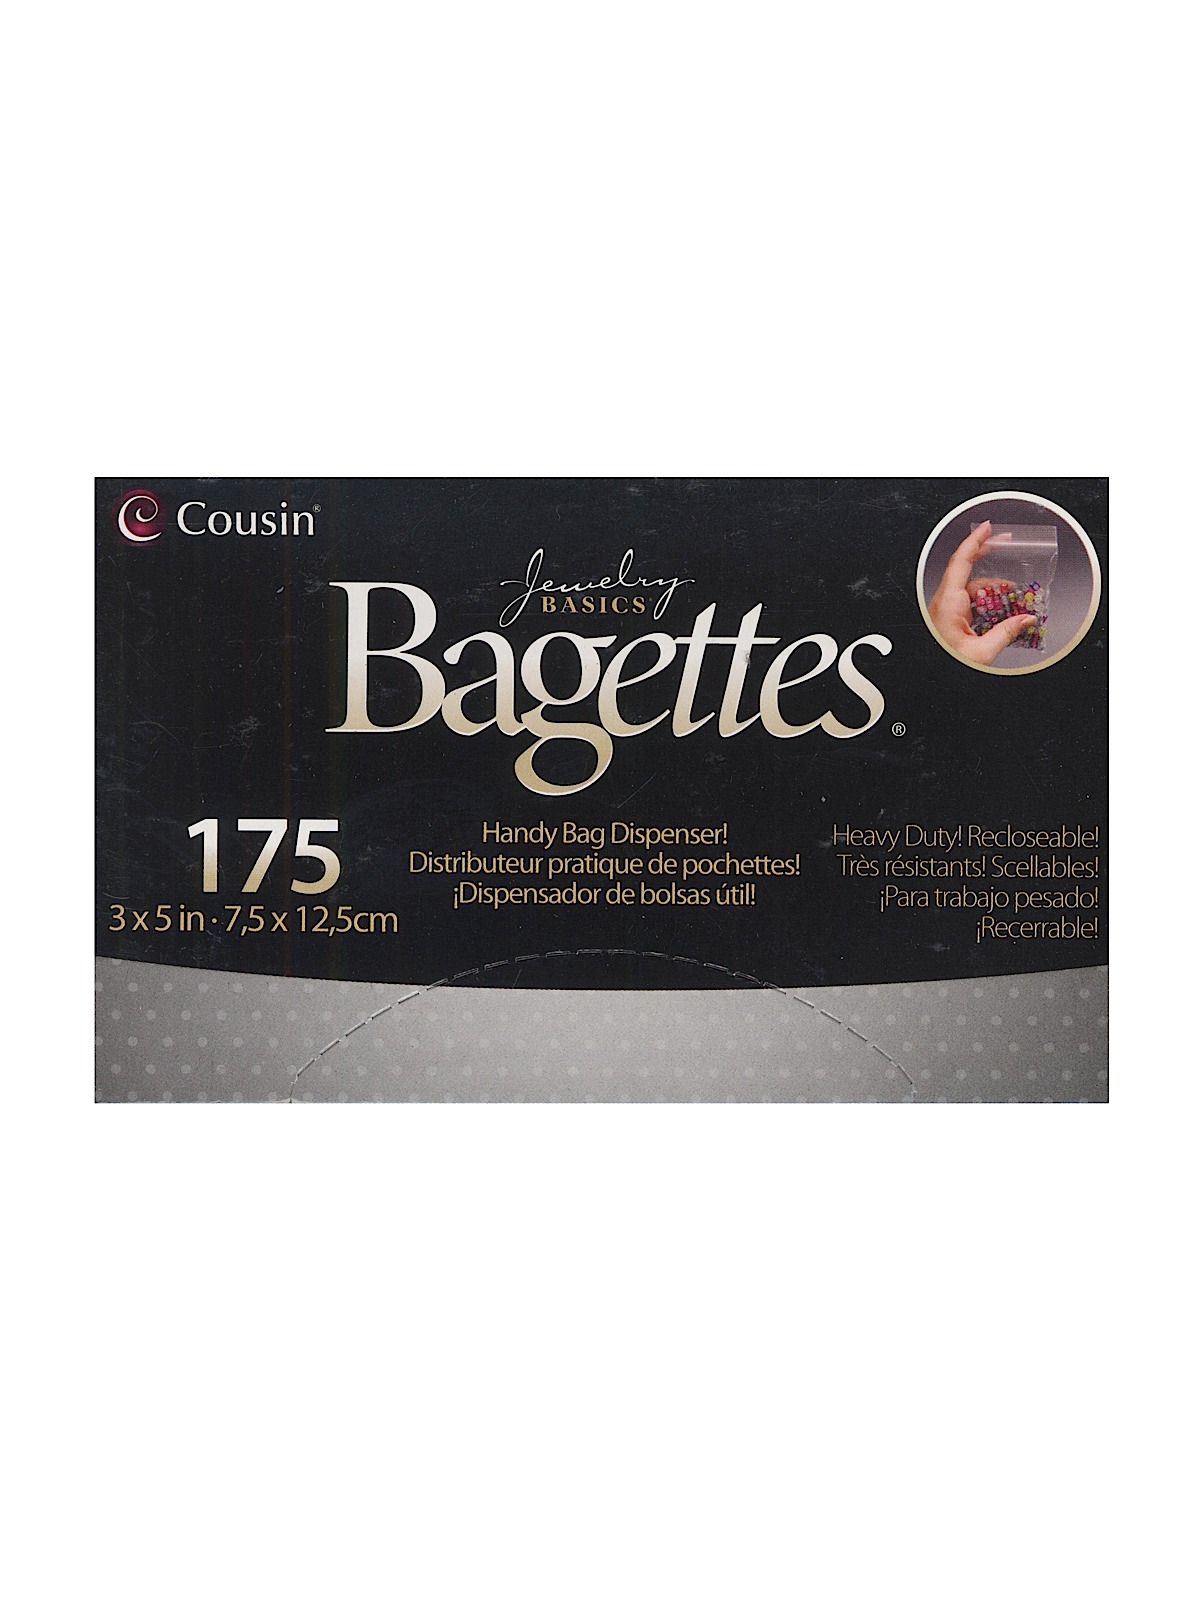 Bagettes Plastic Storage Packets 3 In. X 5 In. Box Of 175